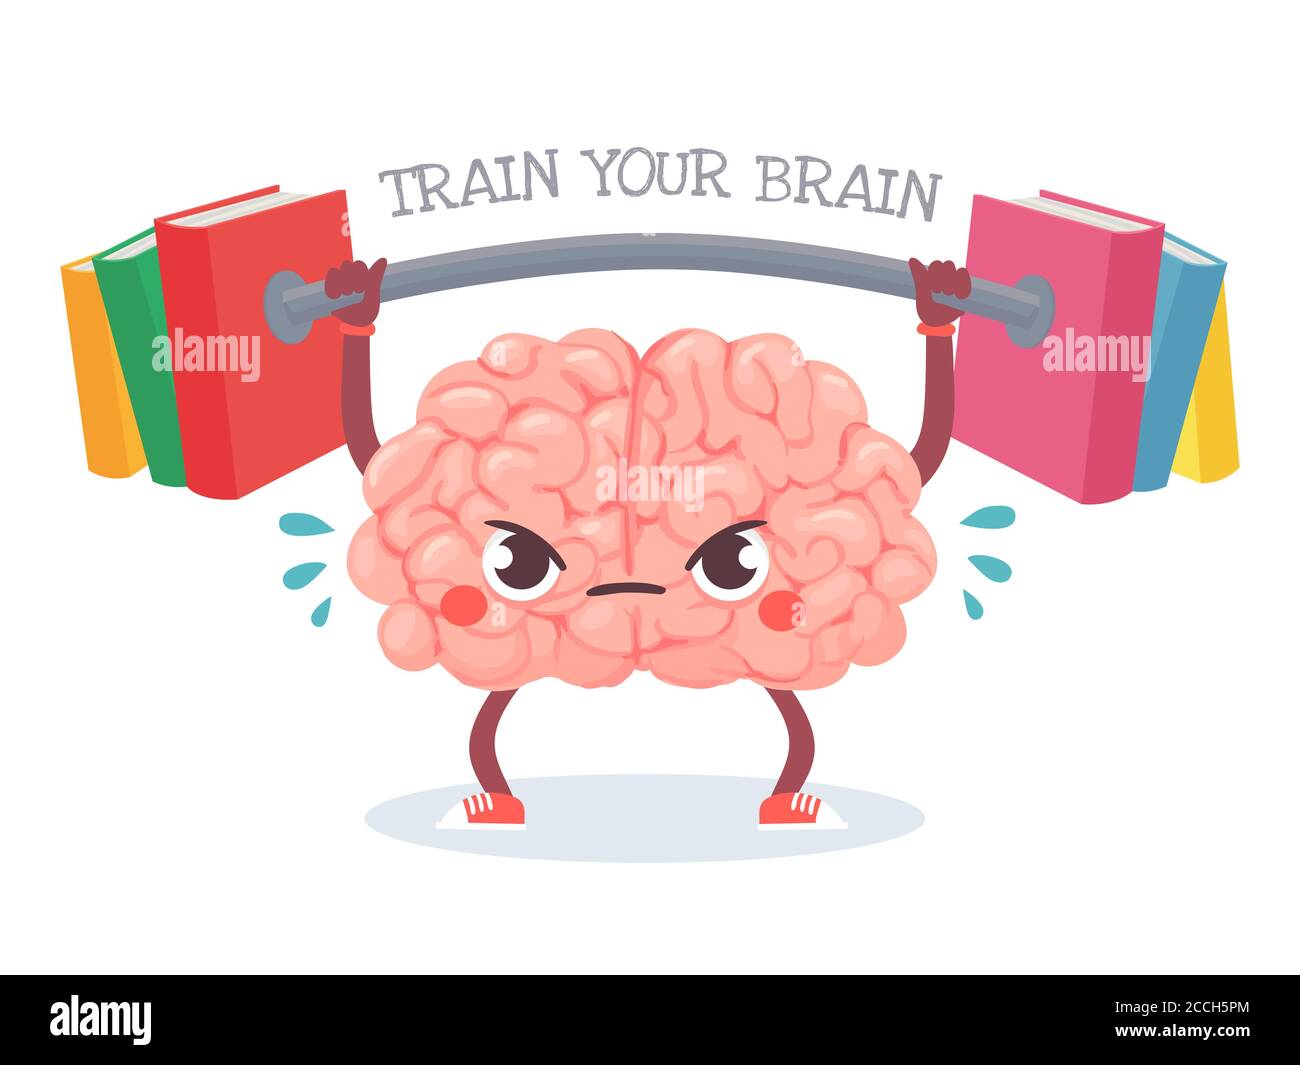 Brain training. Cartoon brain lifts weight with books. Train your memory, studying, learning and knowledge education vector concept Stock Vector